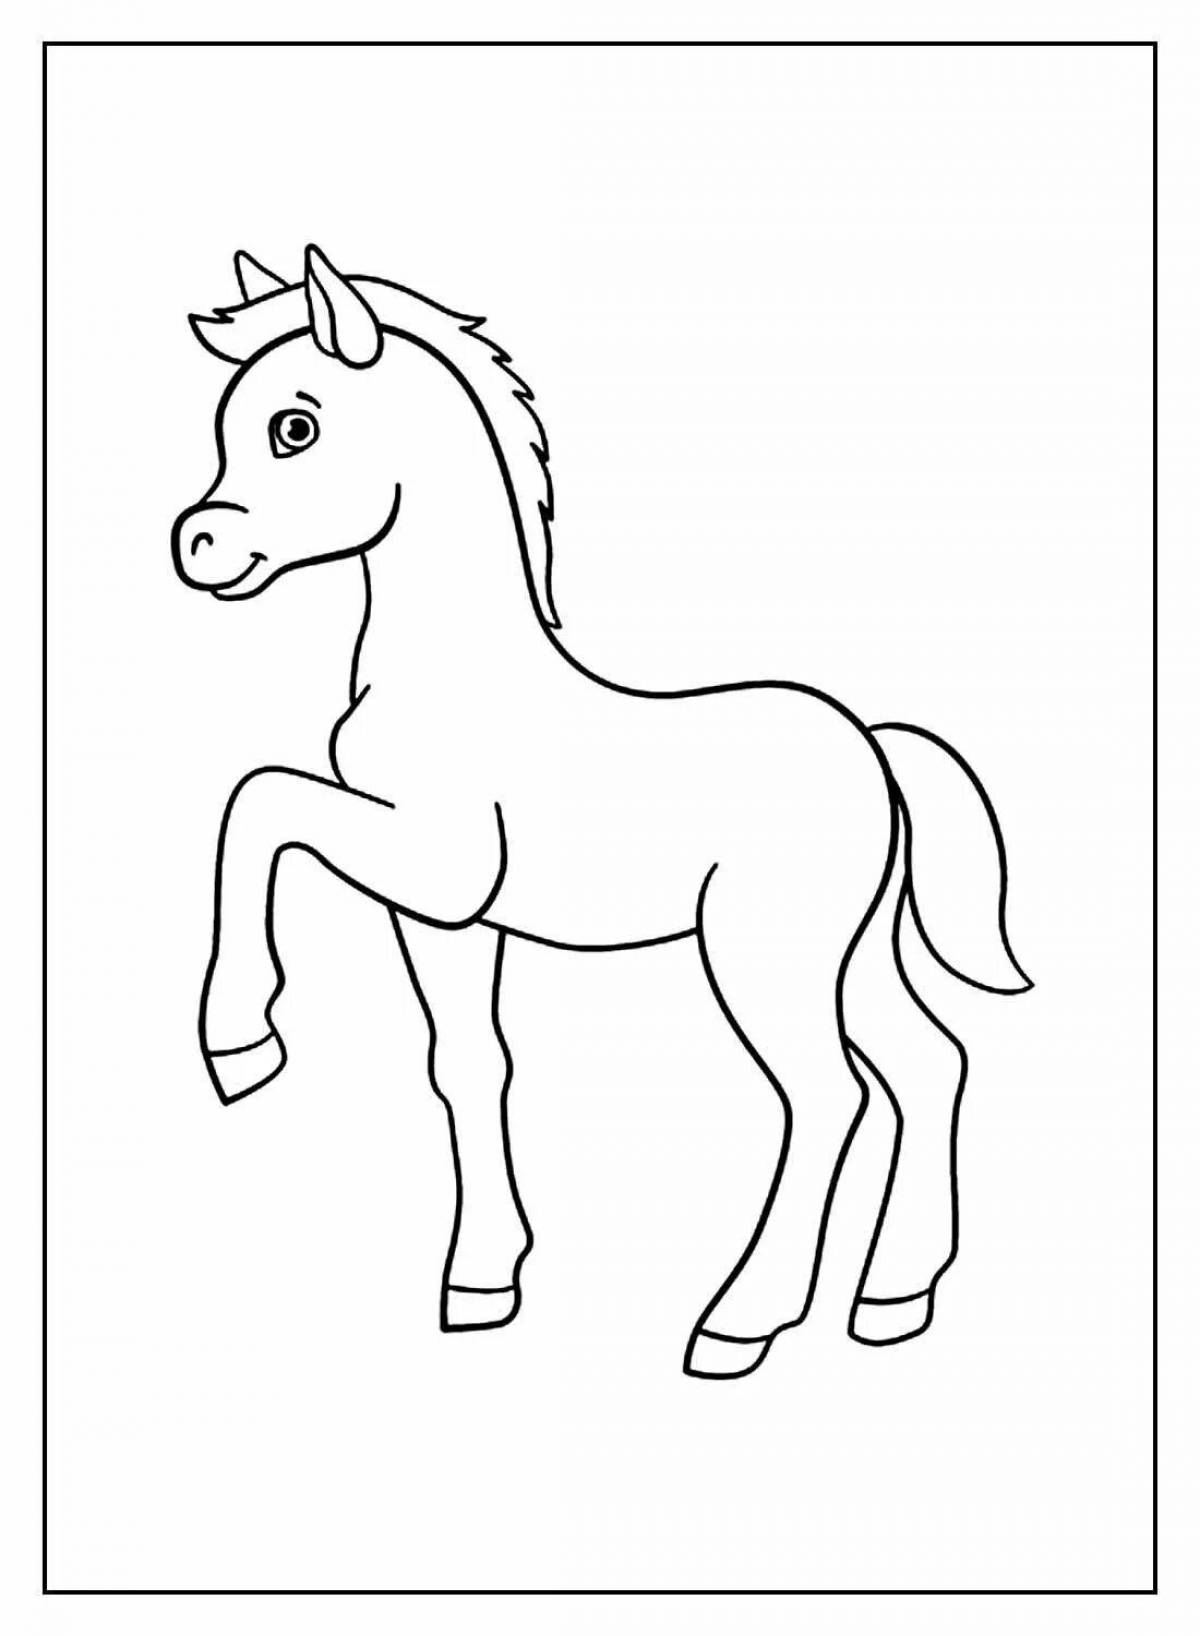 Coloring foal for kids